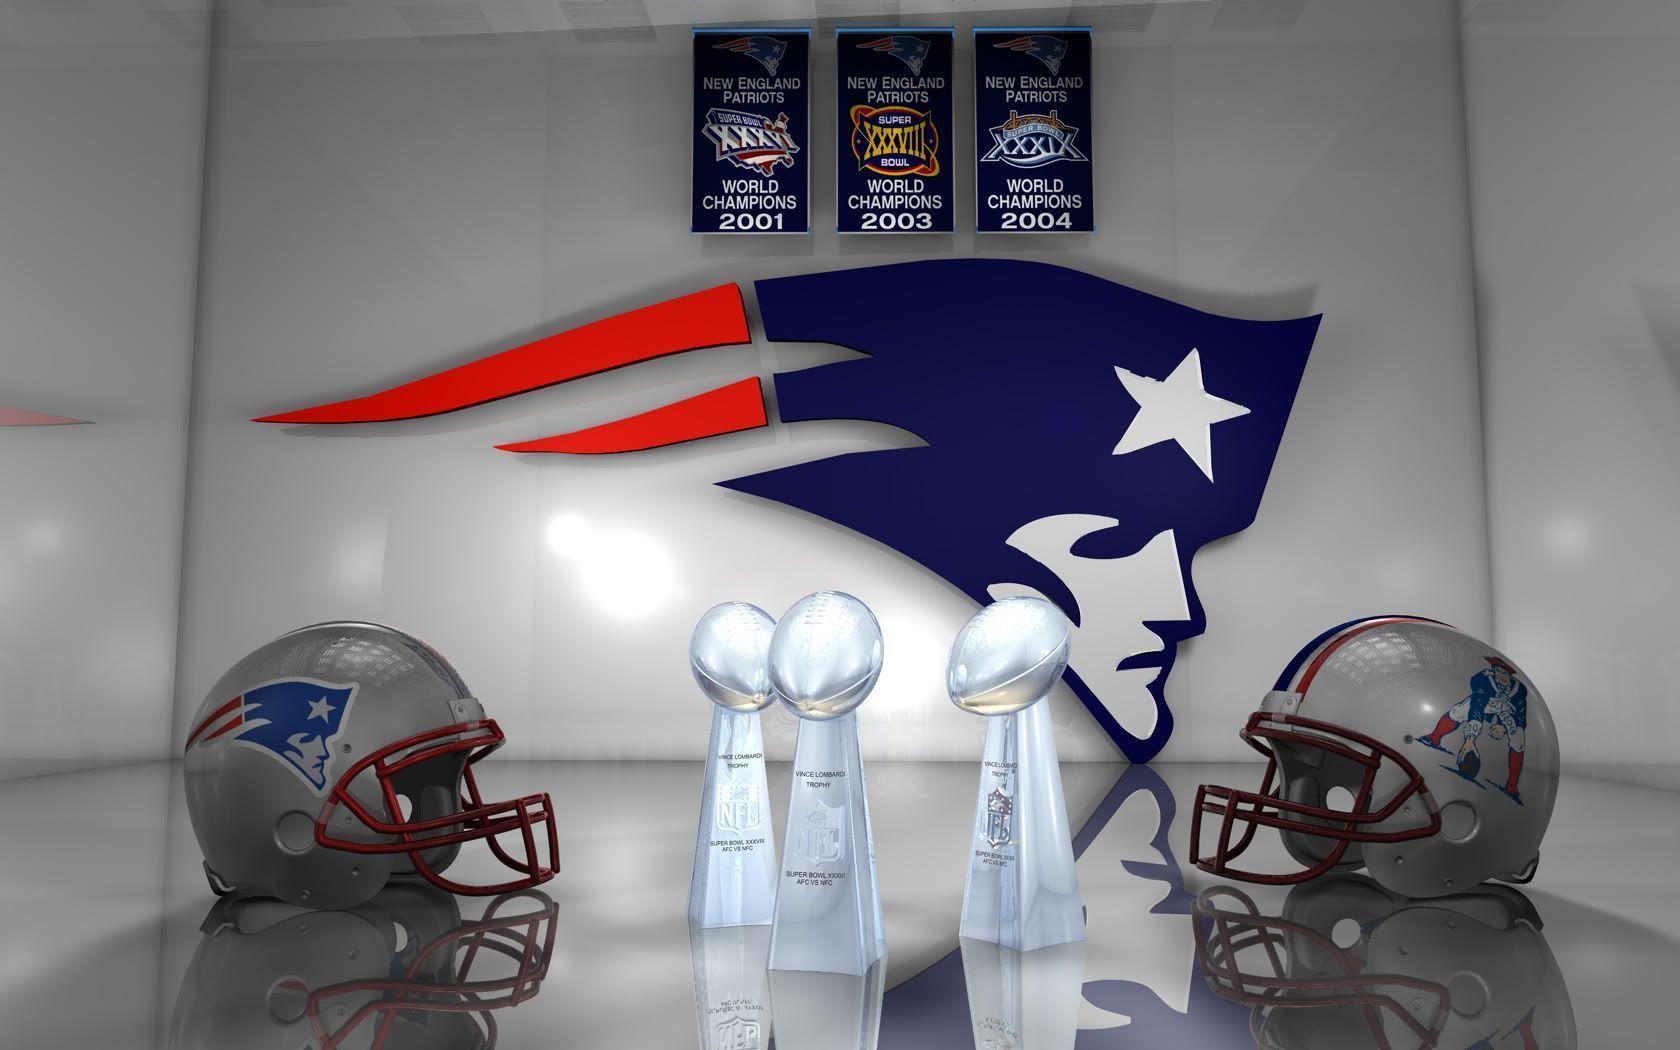 New England Patriots Championships Wallpaper. I love how this came